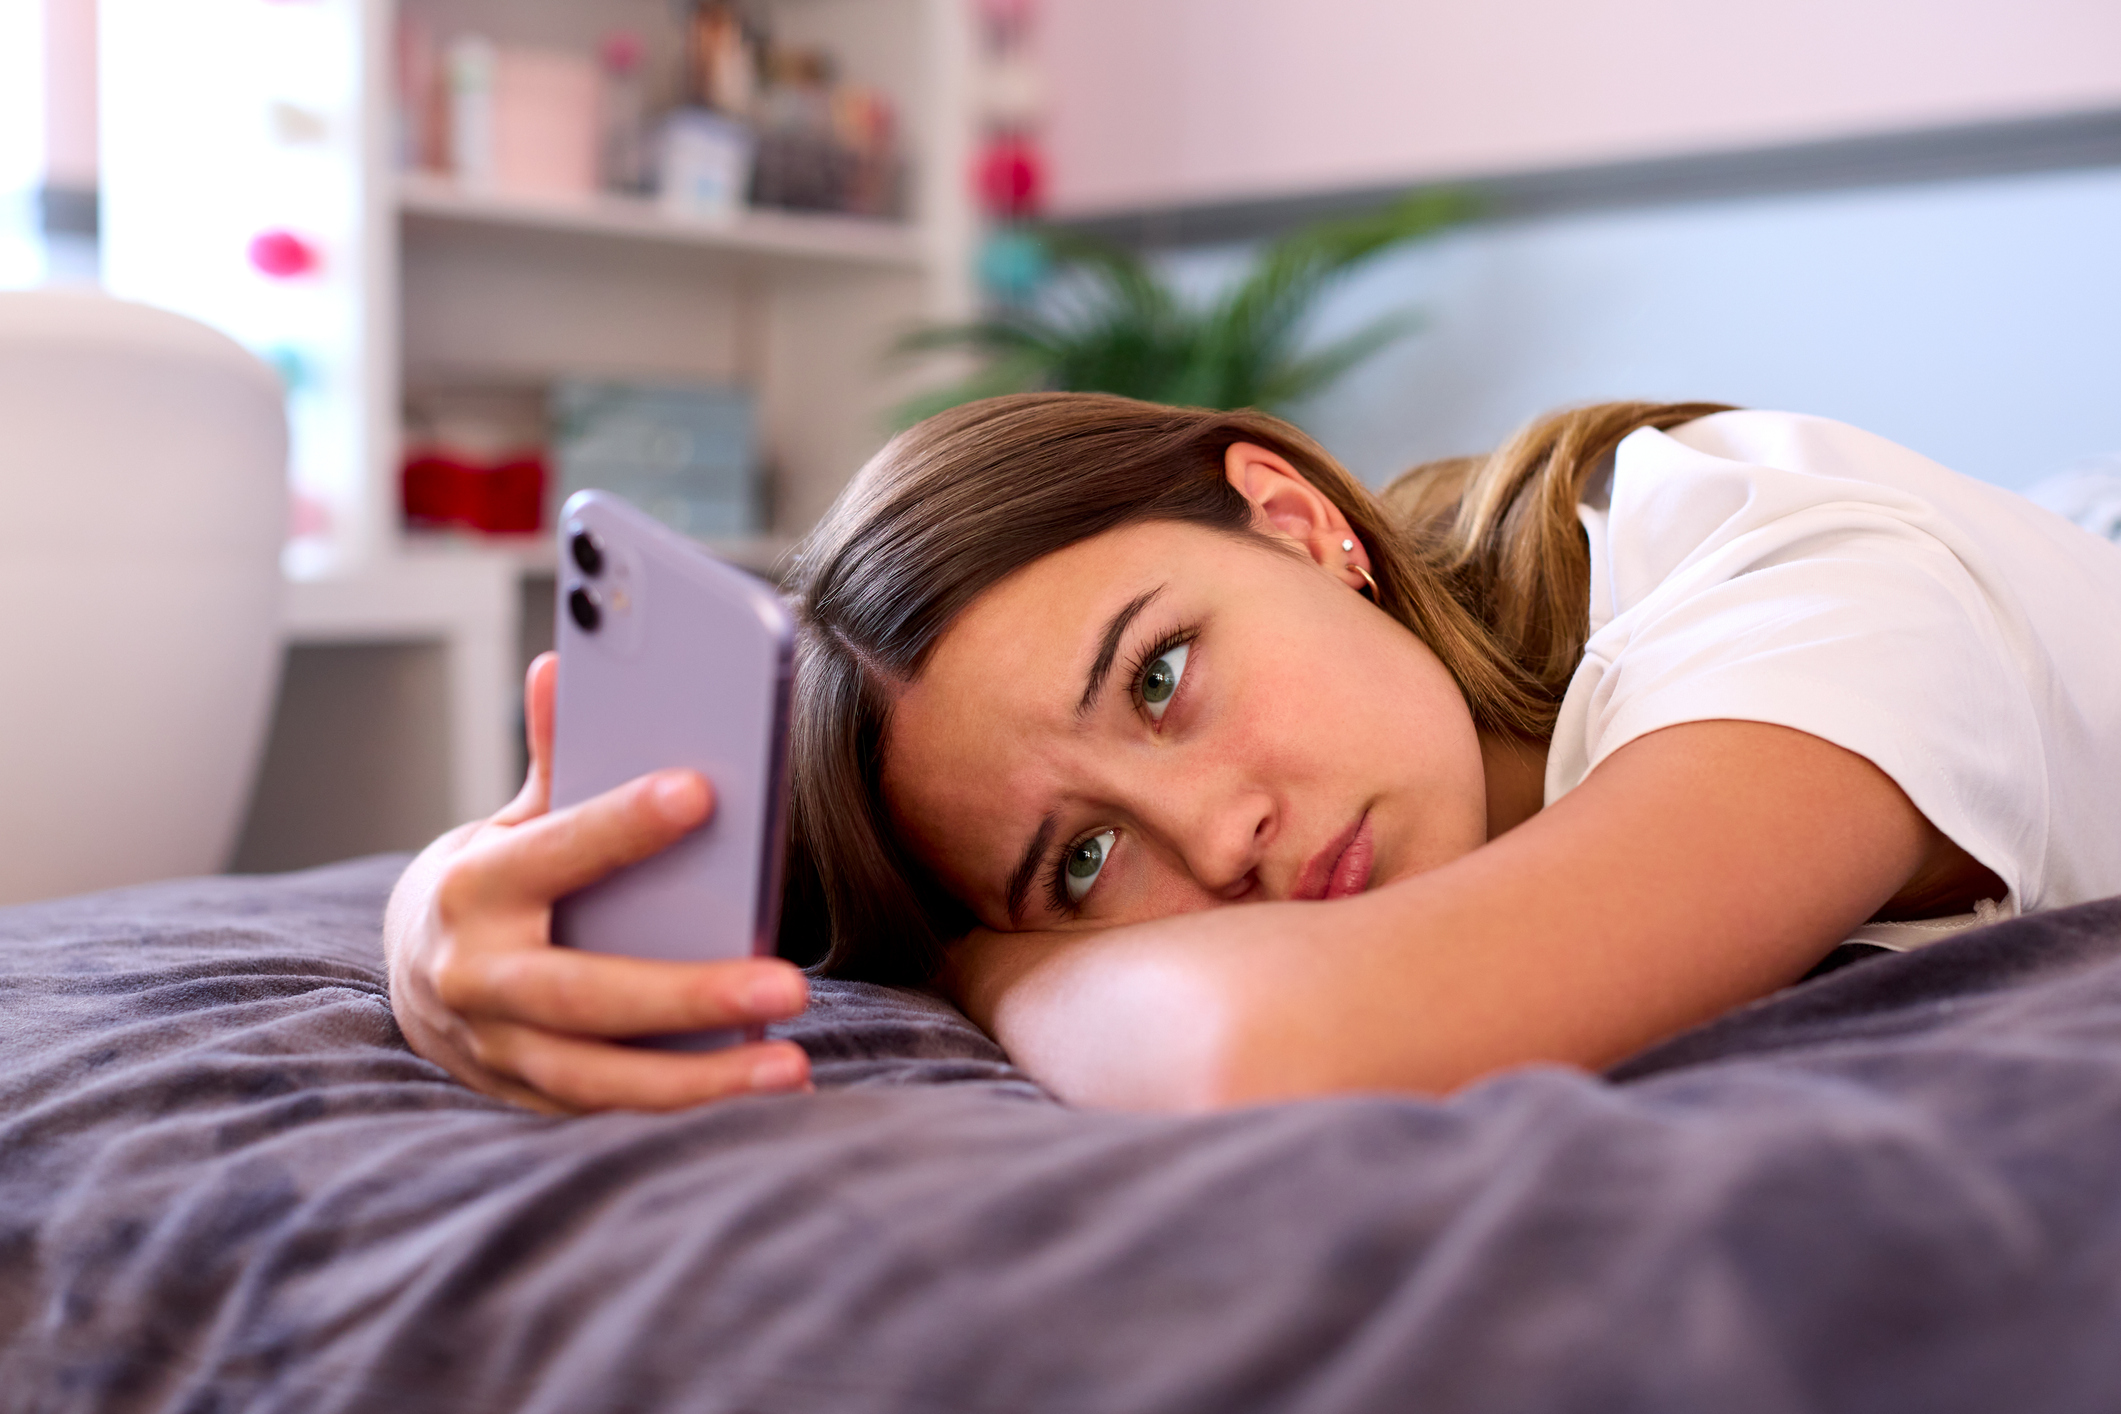 Depressed Teenage Girl Lying On Bed At Home Looking At Mobile Phone - kids in crisis